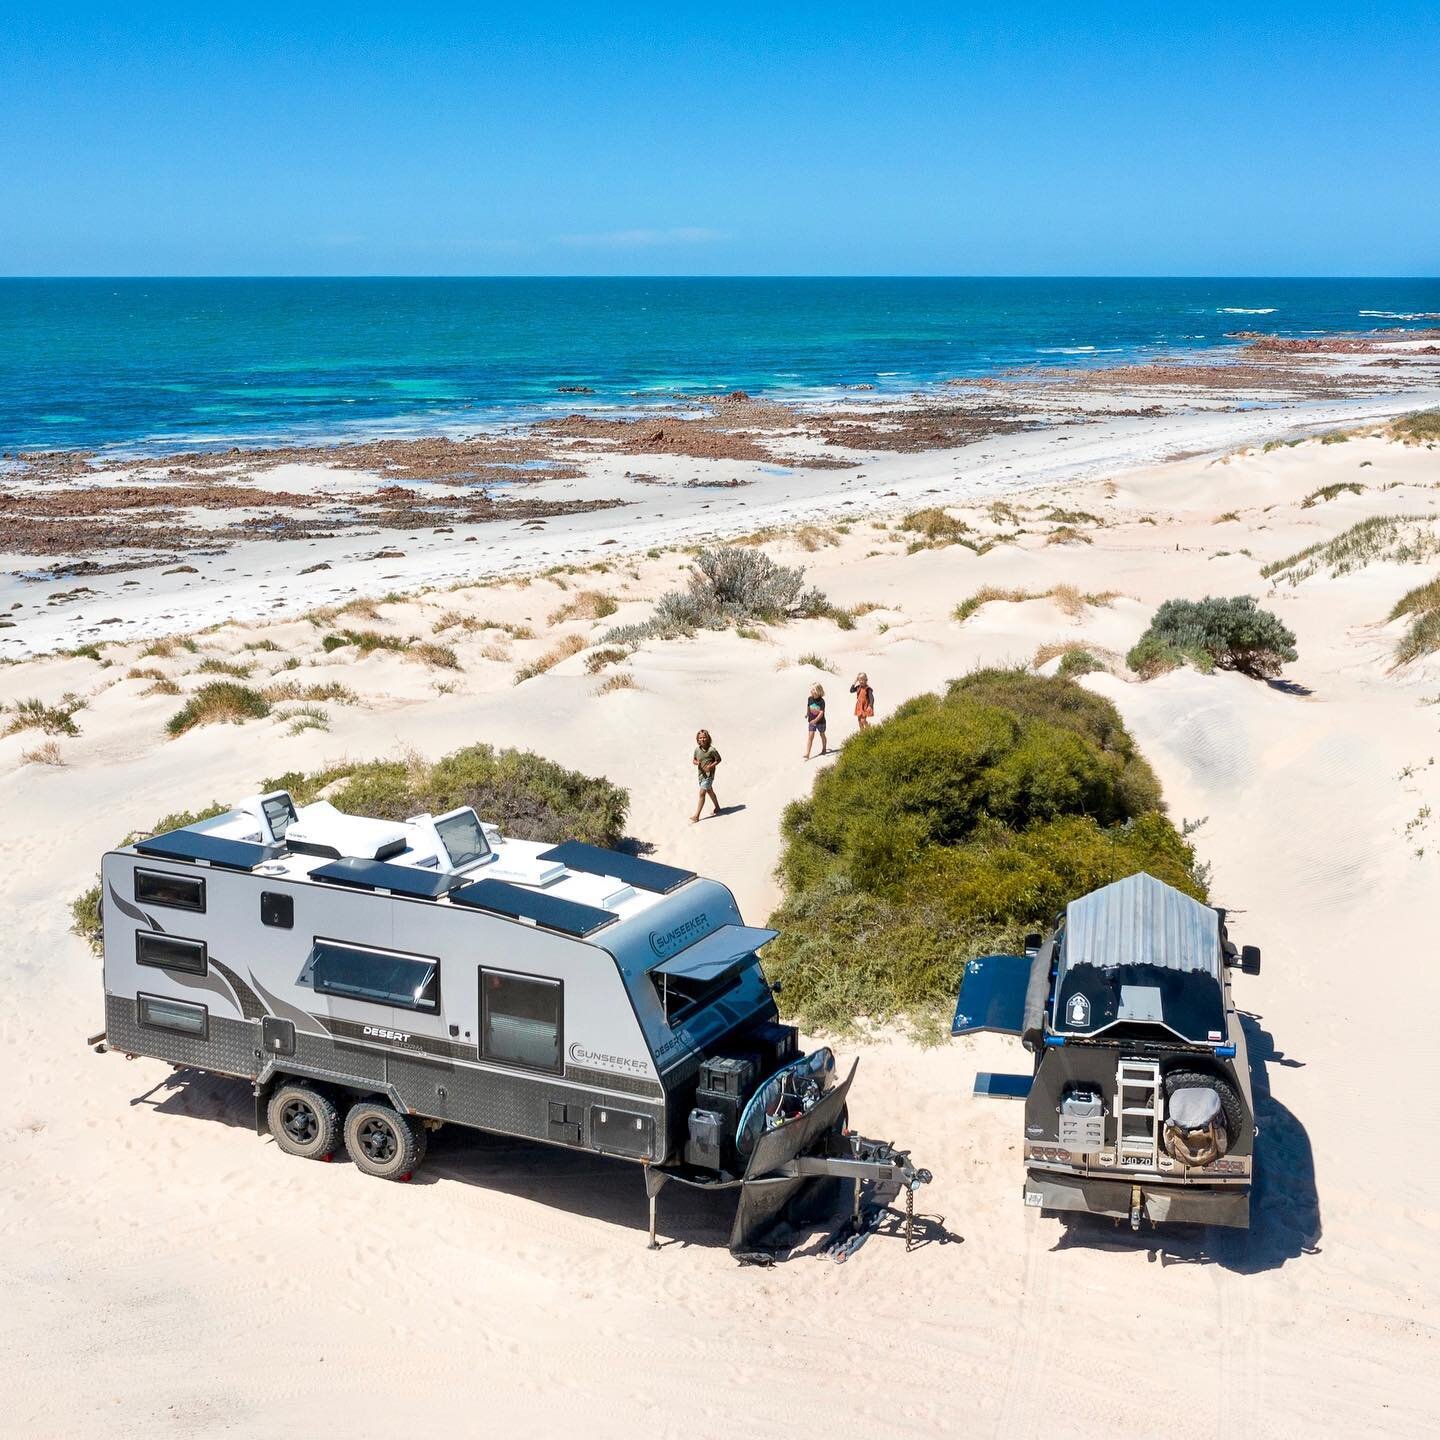 I think we&rsquo;re gonna crown SA the &lsquo;best low cost beach camps in Australia&rsquo;.
We&rsquo;ve been cruising down the Eyre Peninsula and stopping every 40mins to stay at a new beach camp. The EP is full of them!
Here is yet another cracker at Port Gibbon. Make sure you SAVE it, so you can go and see it for yourself.